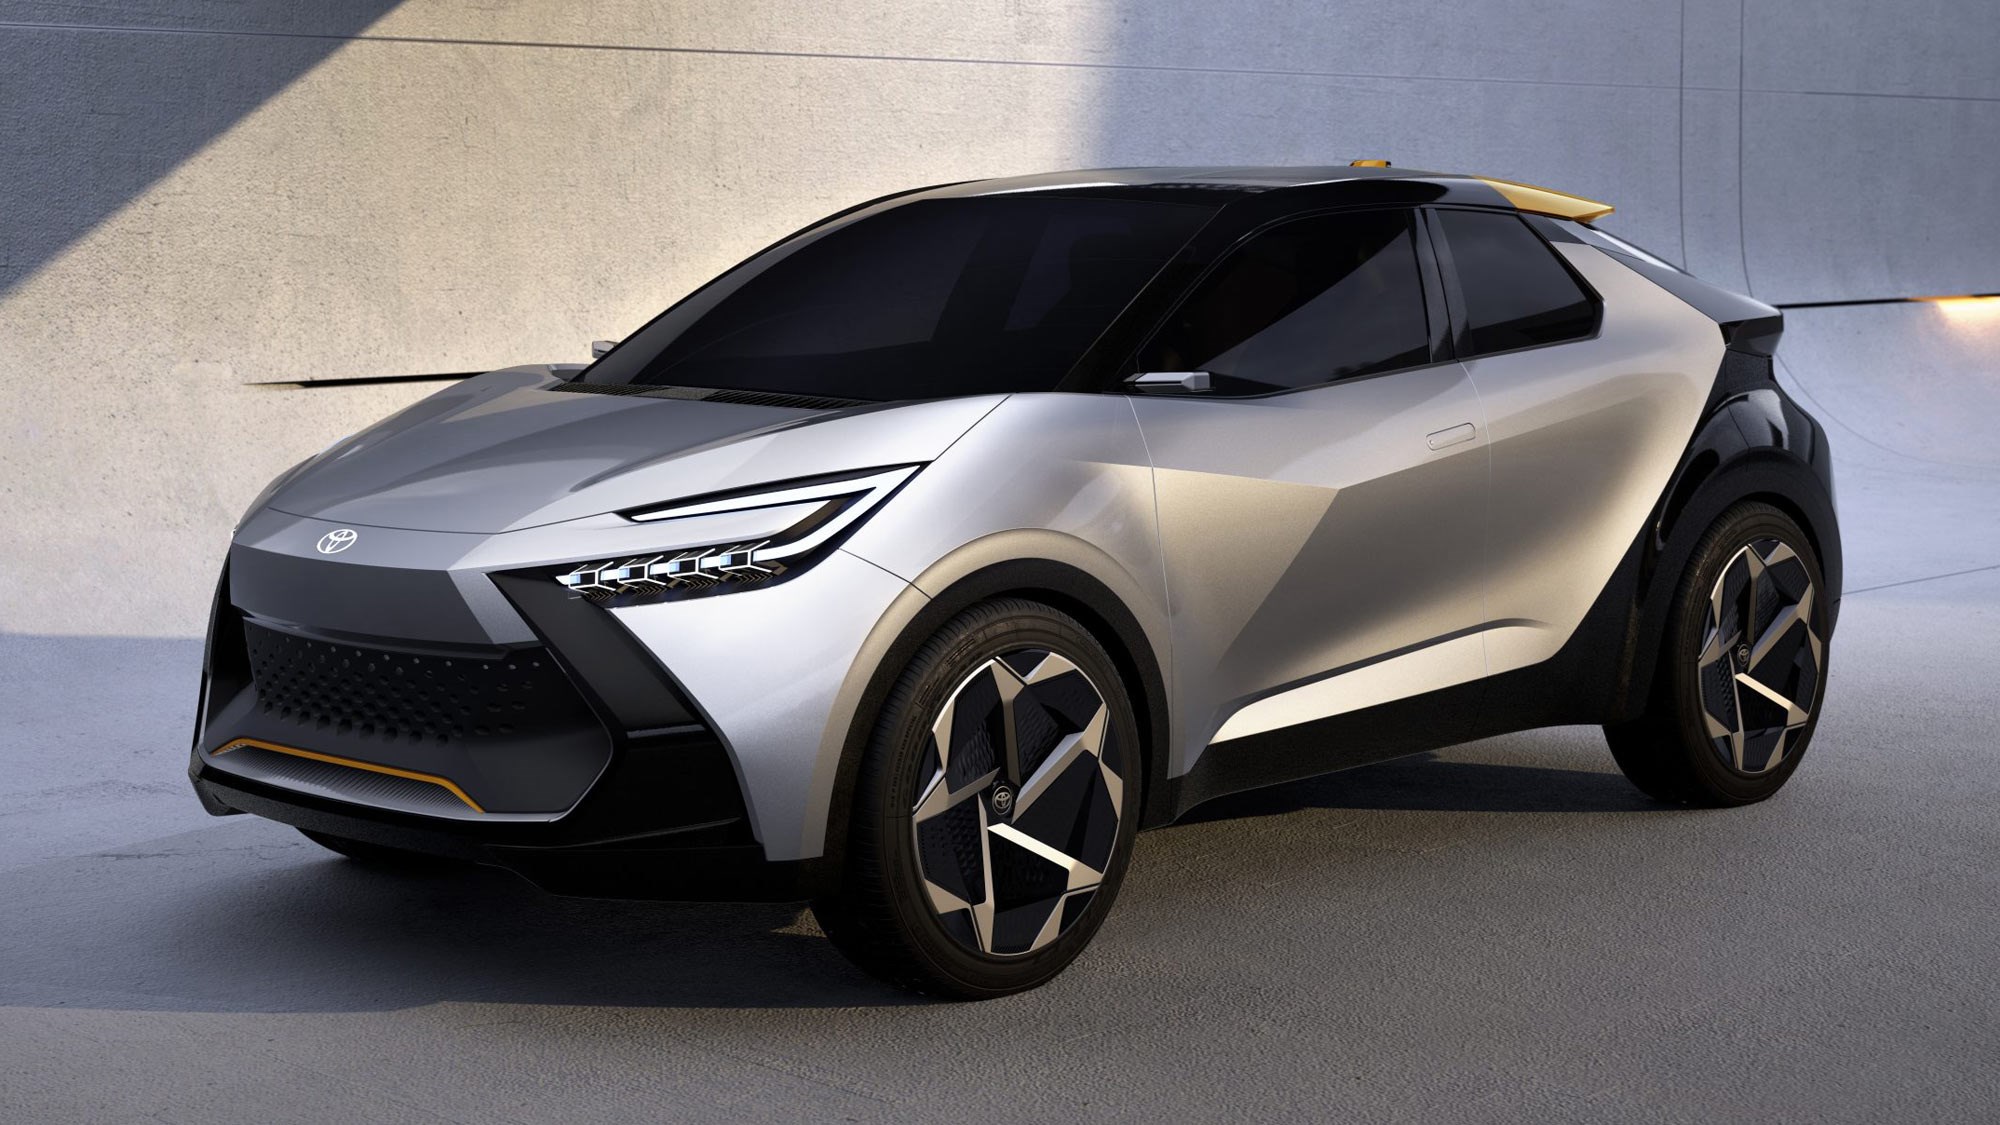 Toyota C-HR Review, Colours, Interior, For Sale, Specs & News